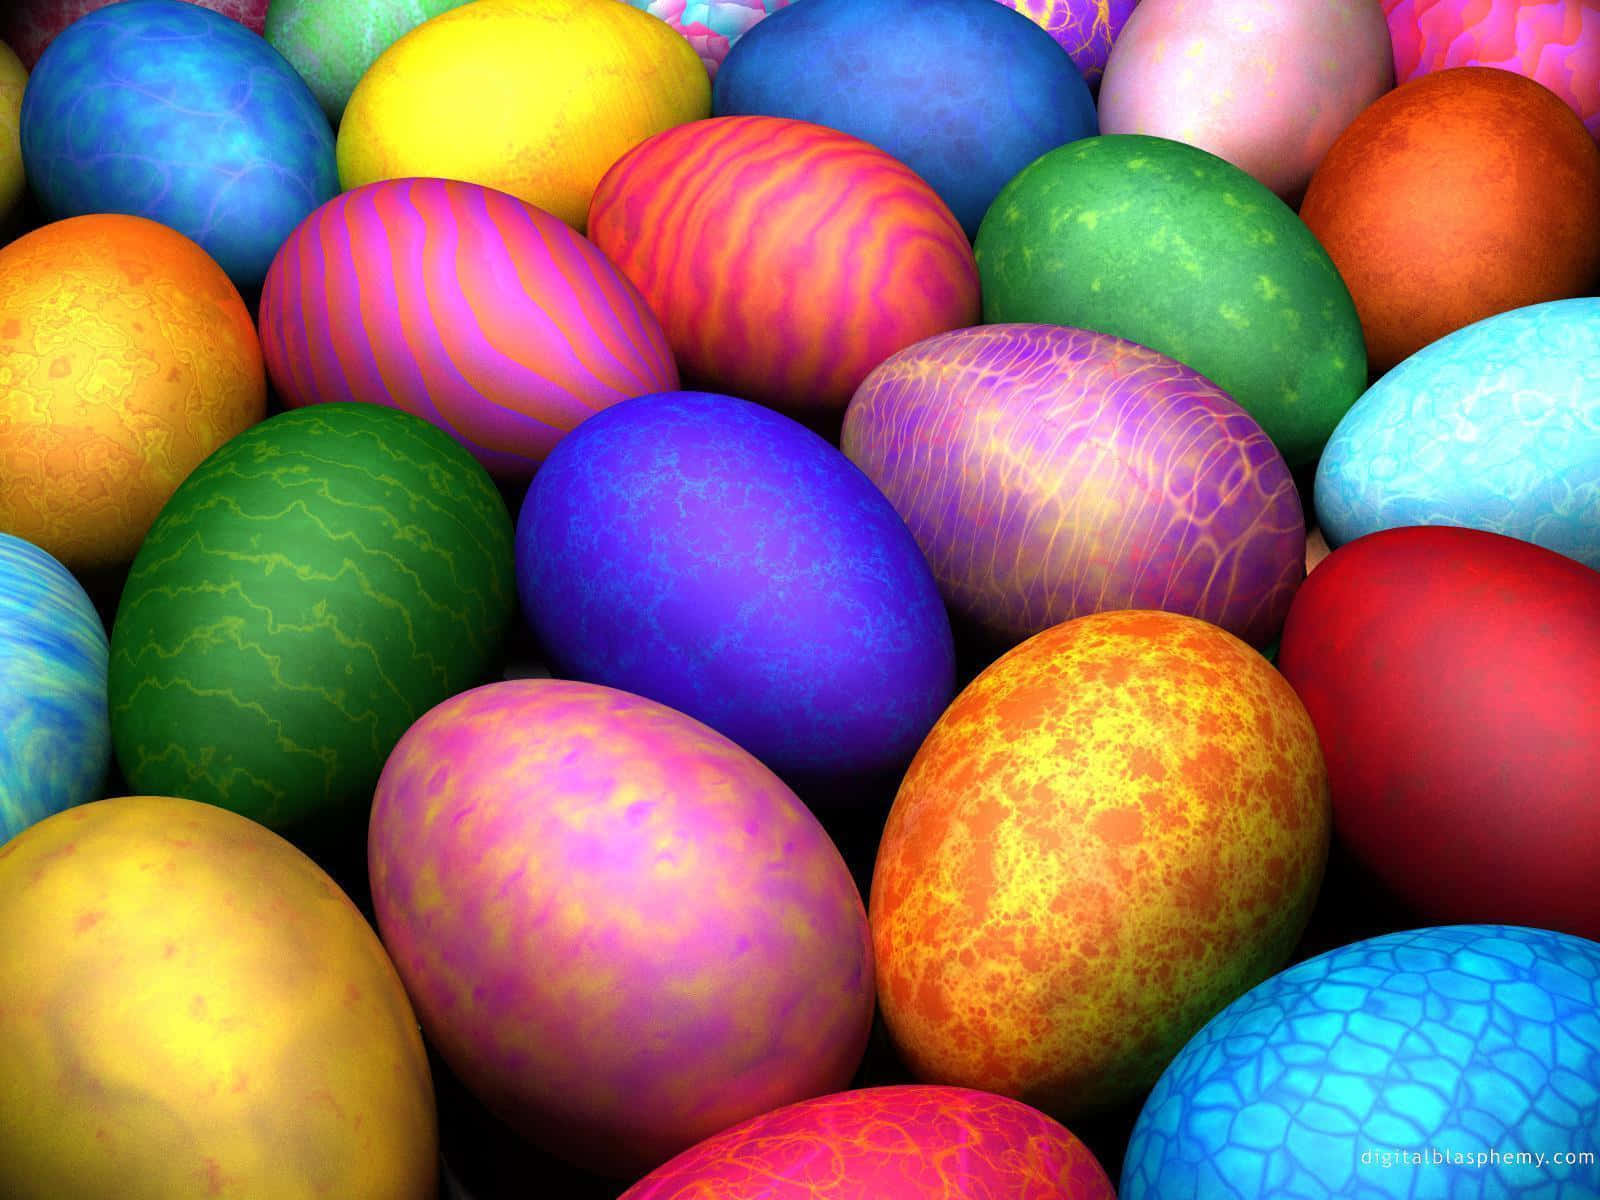 A Group Of Colorful Easter Eggs Are Arranged In A Pile